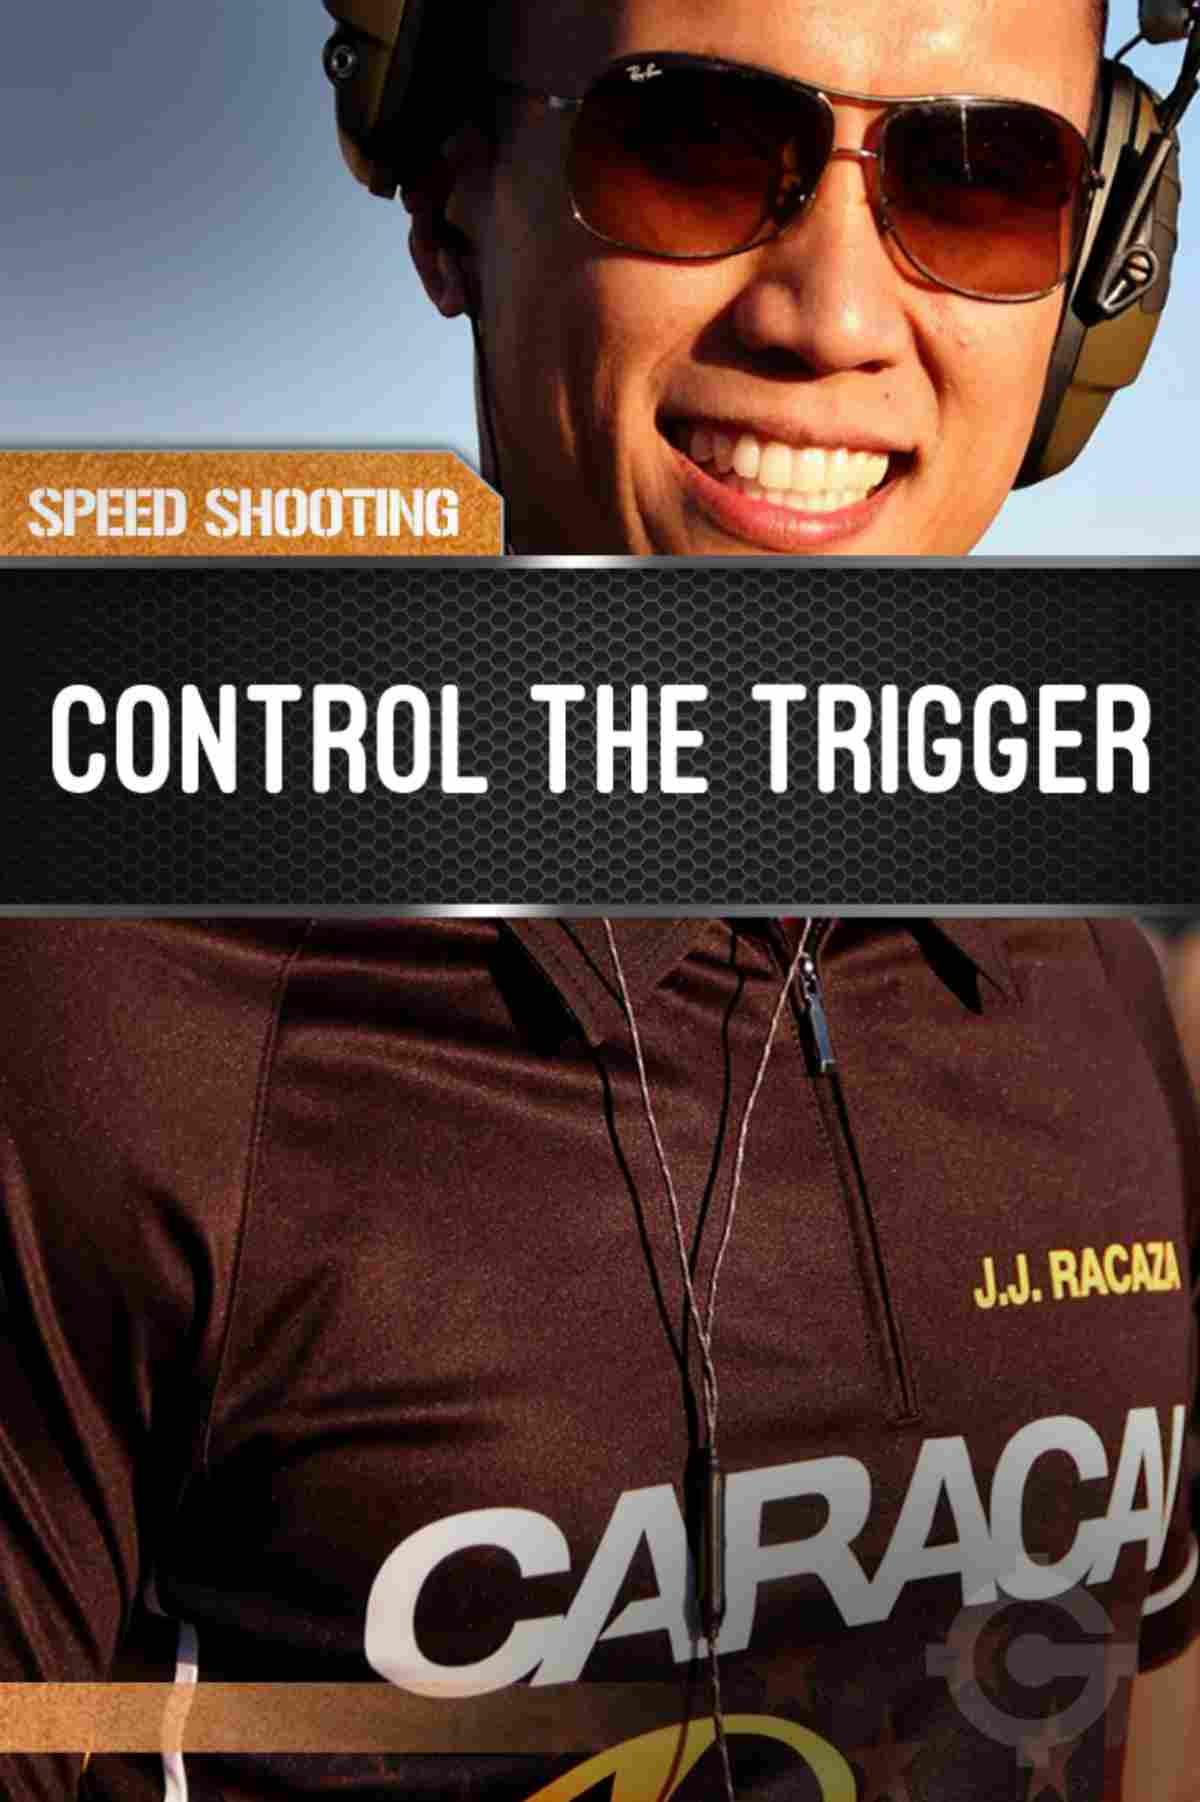 control the trigger | Speed Shooting Tips: How To Control Trigger | speed shooting | speed shooting shotgun